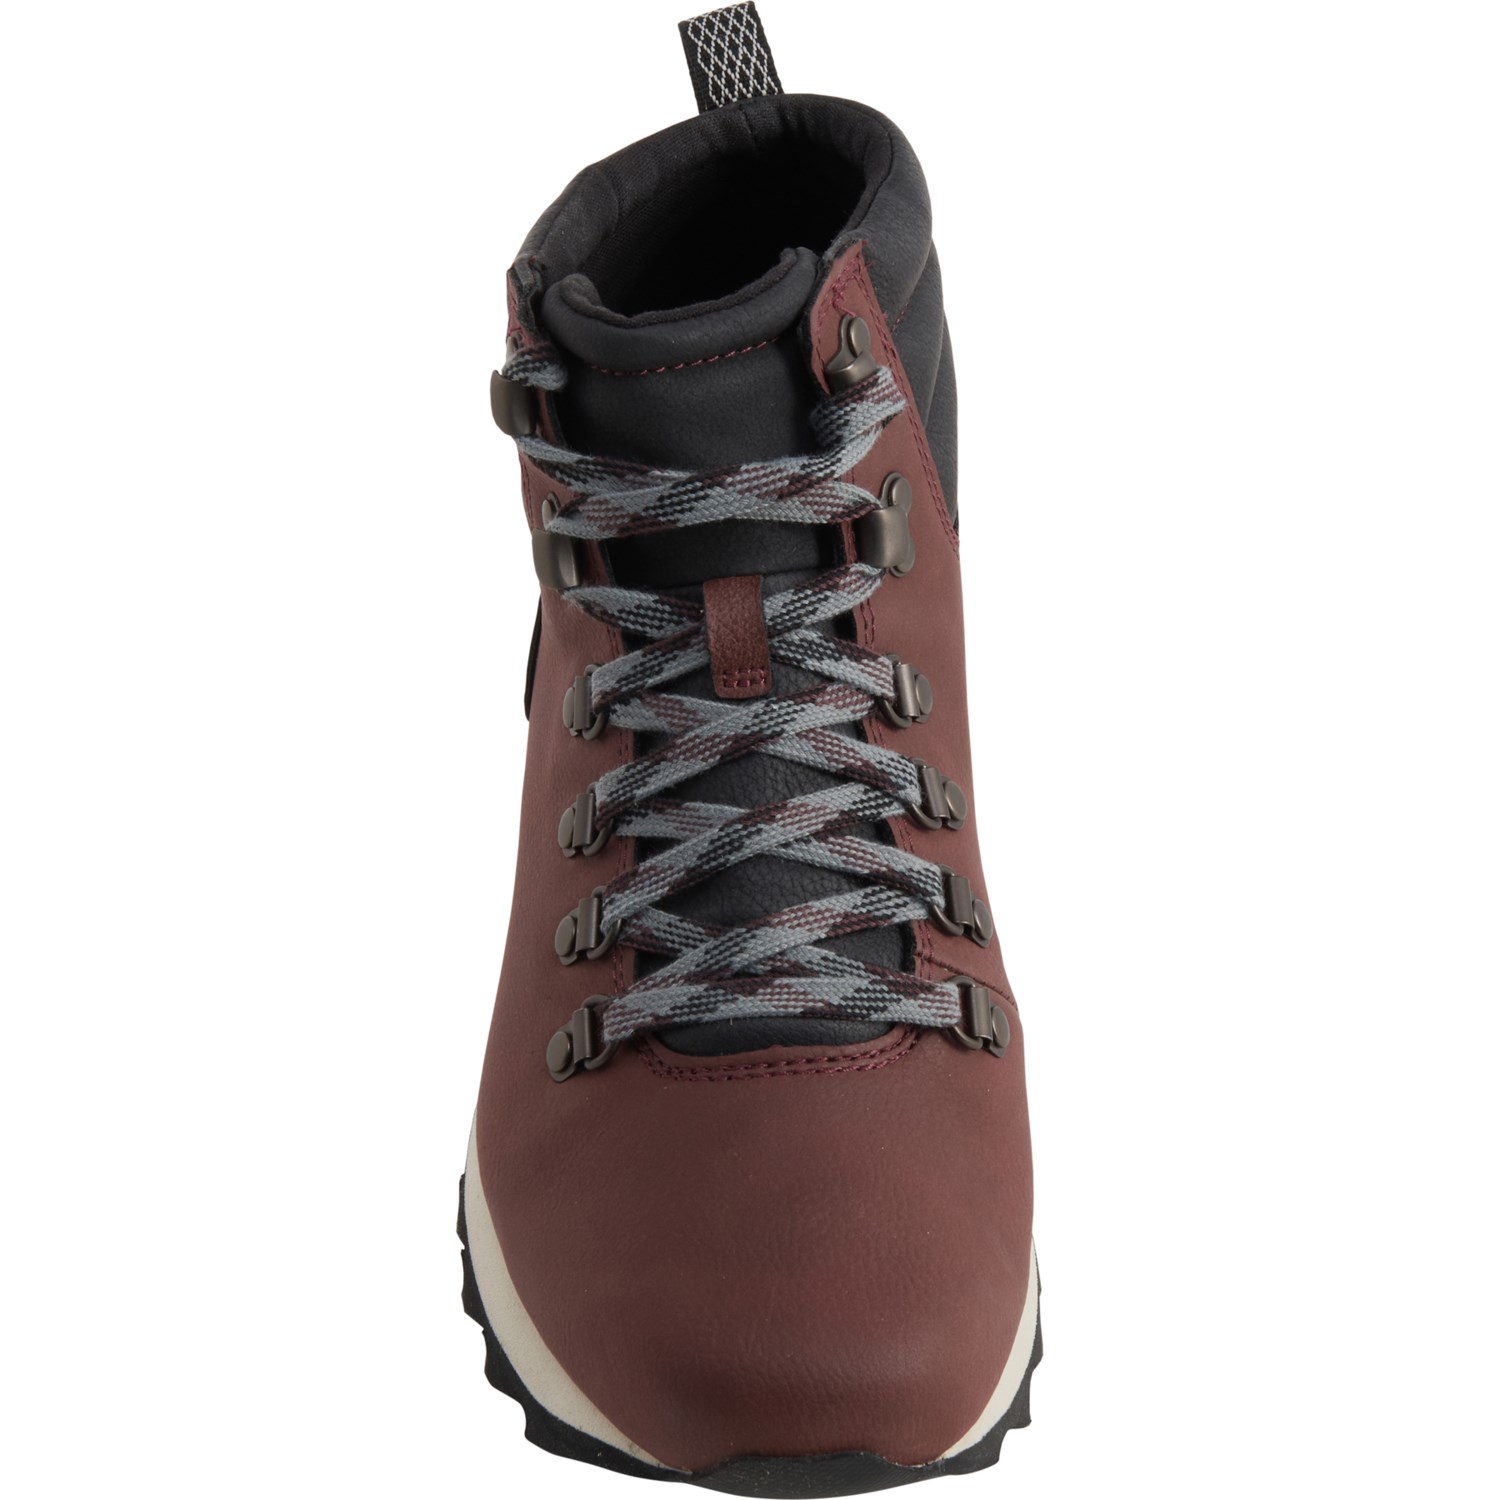 Merrell Alpine Hiking Boots (For Women) - Save 33%